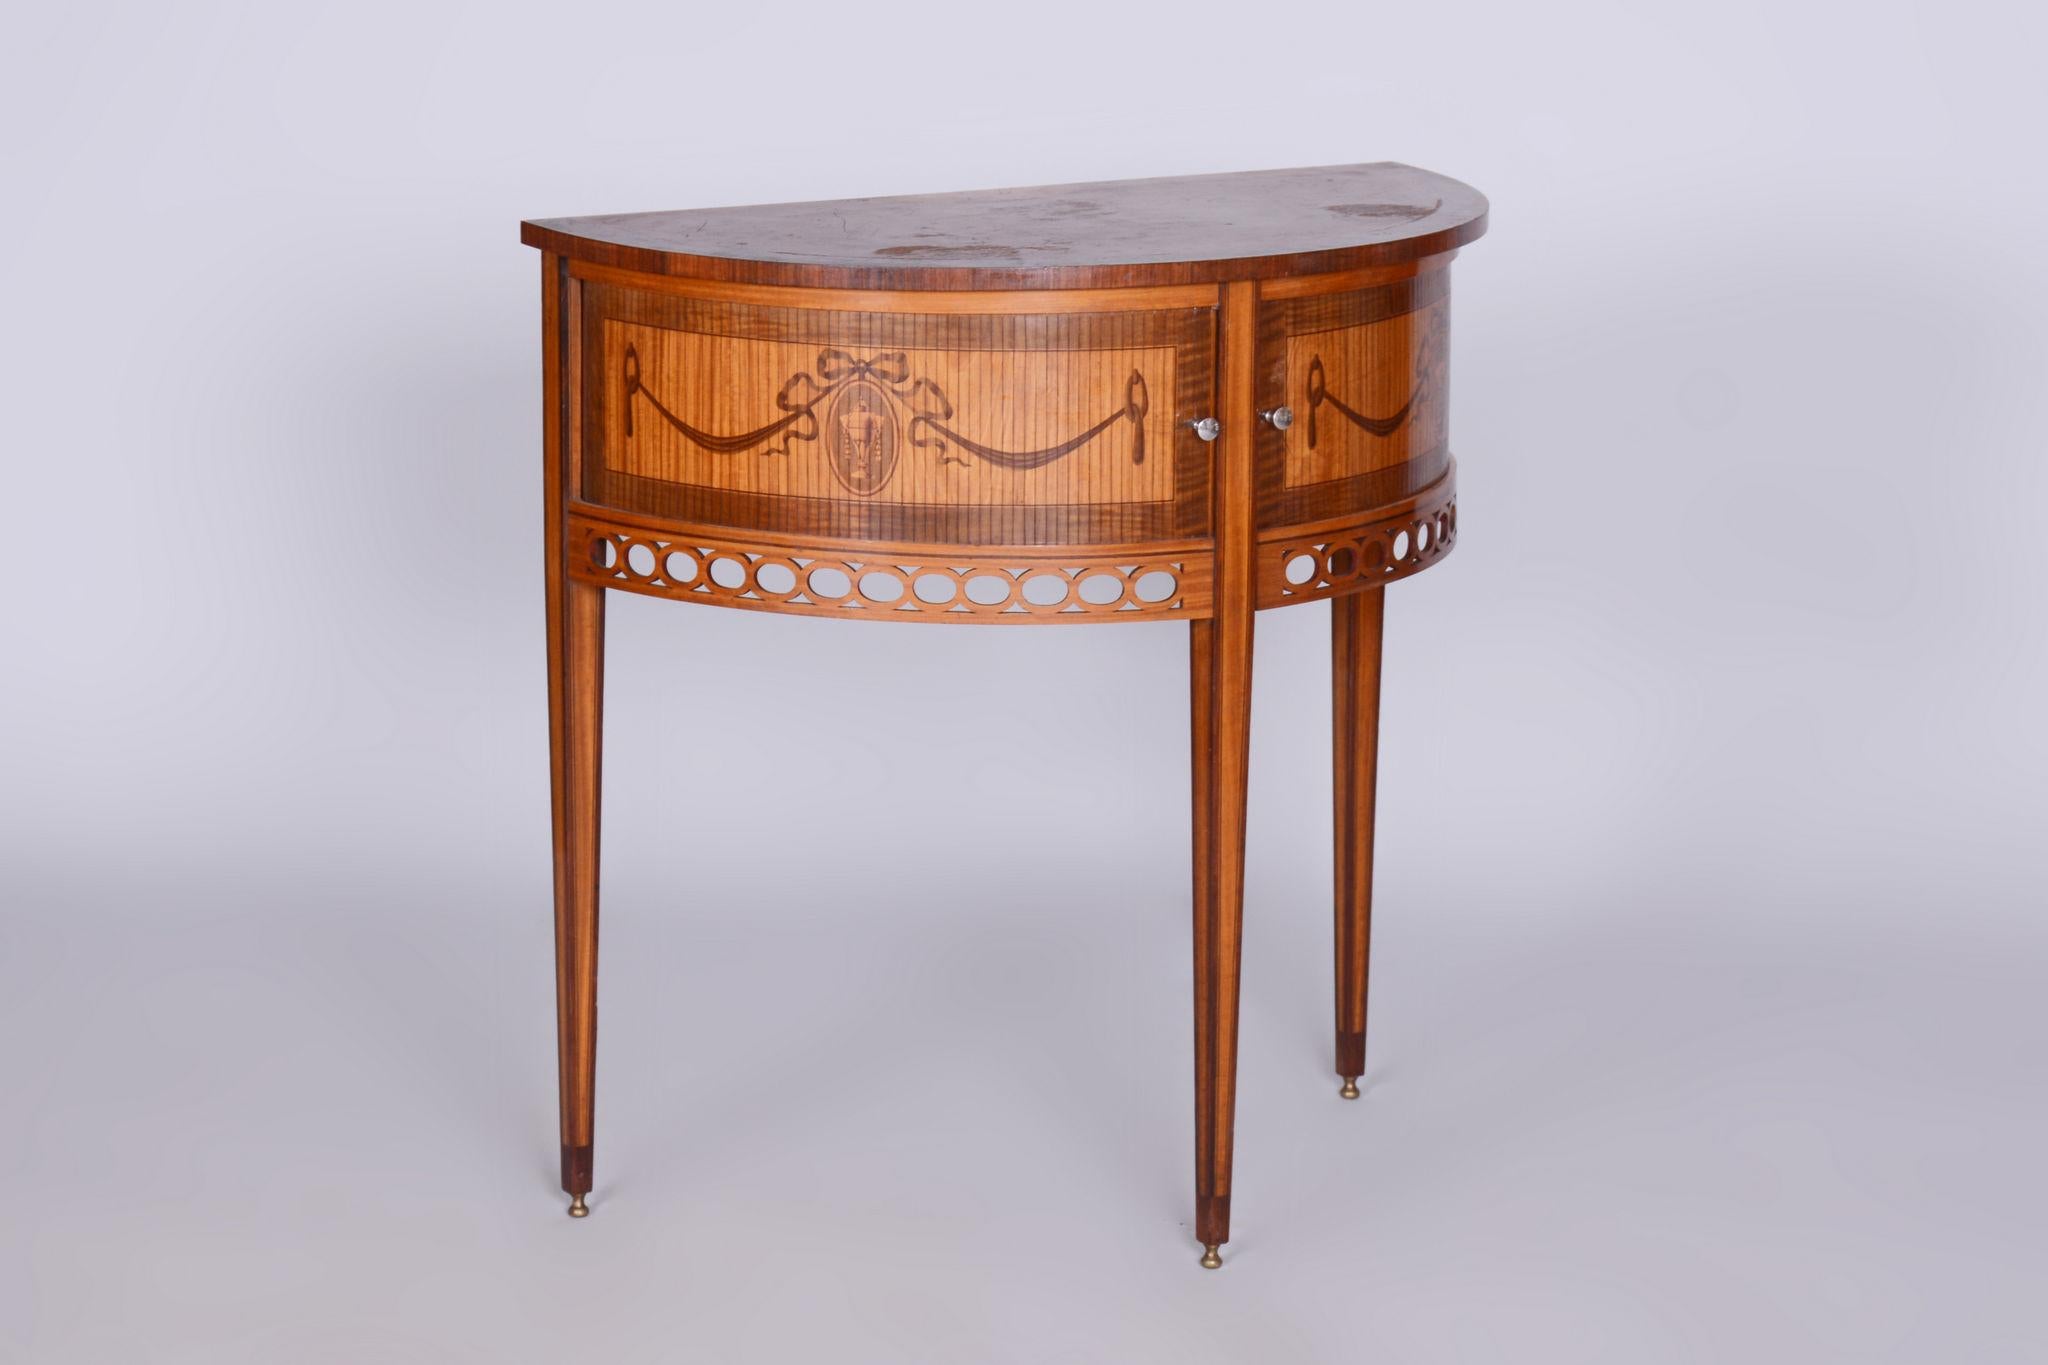 Restored Biedermeier Side Table, Walnut, Maple, Unique Marquetry, France, 1850s For Sale 4